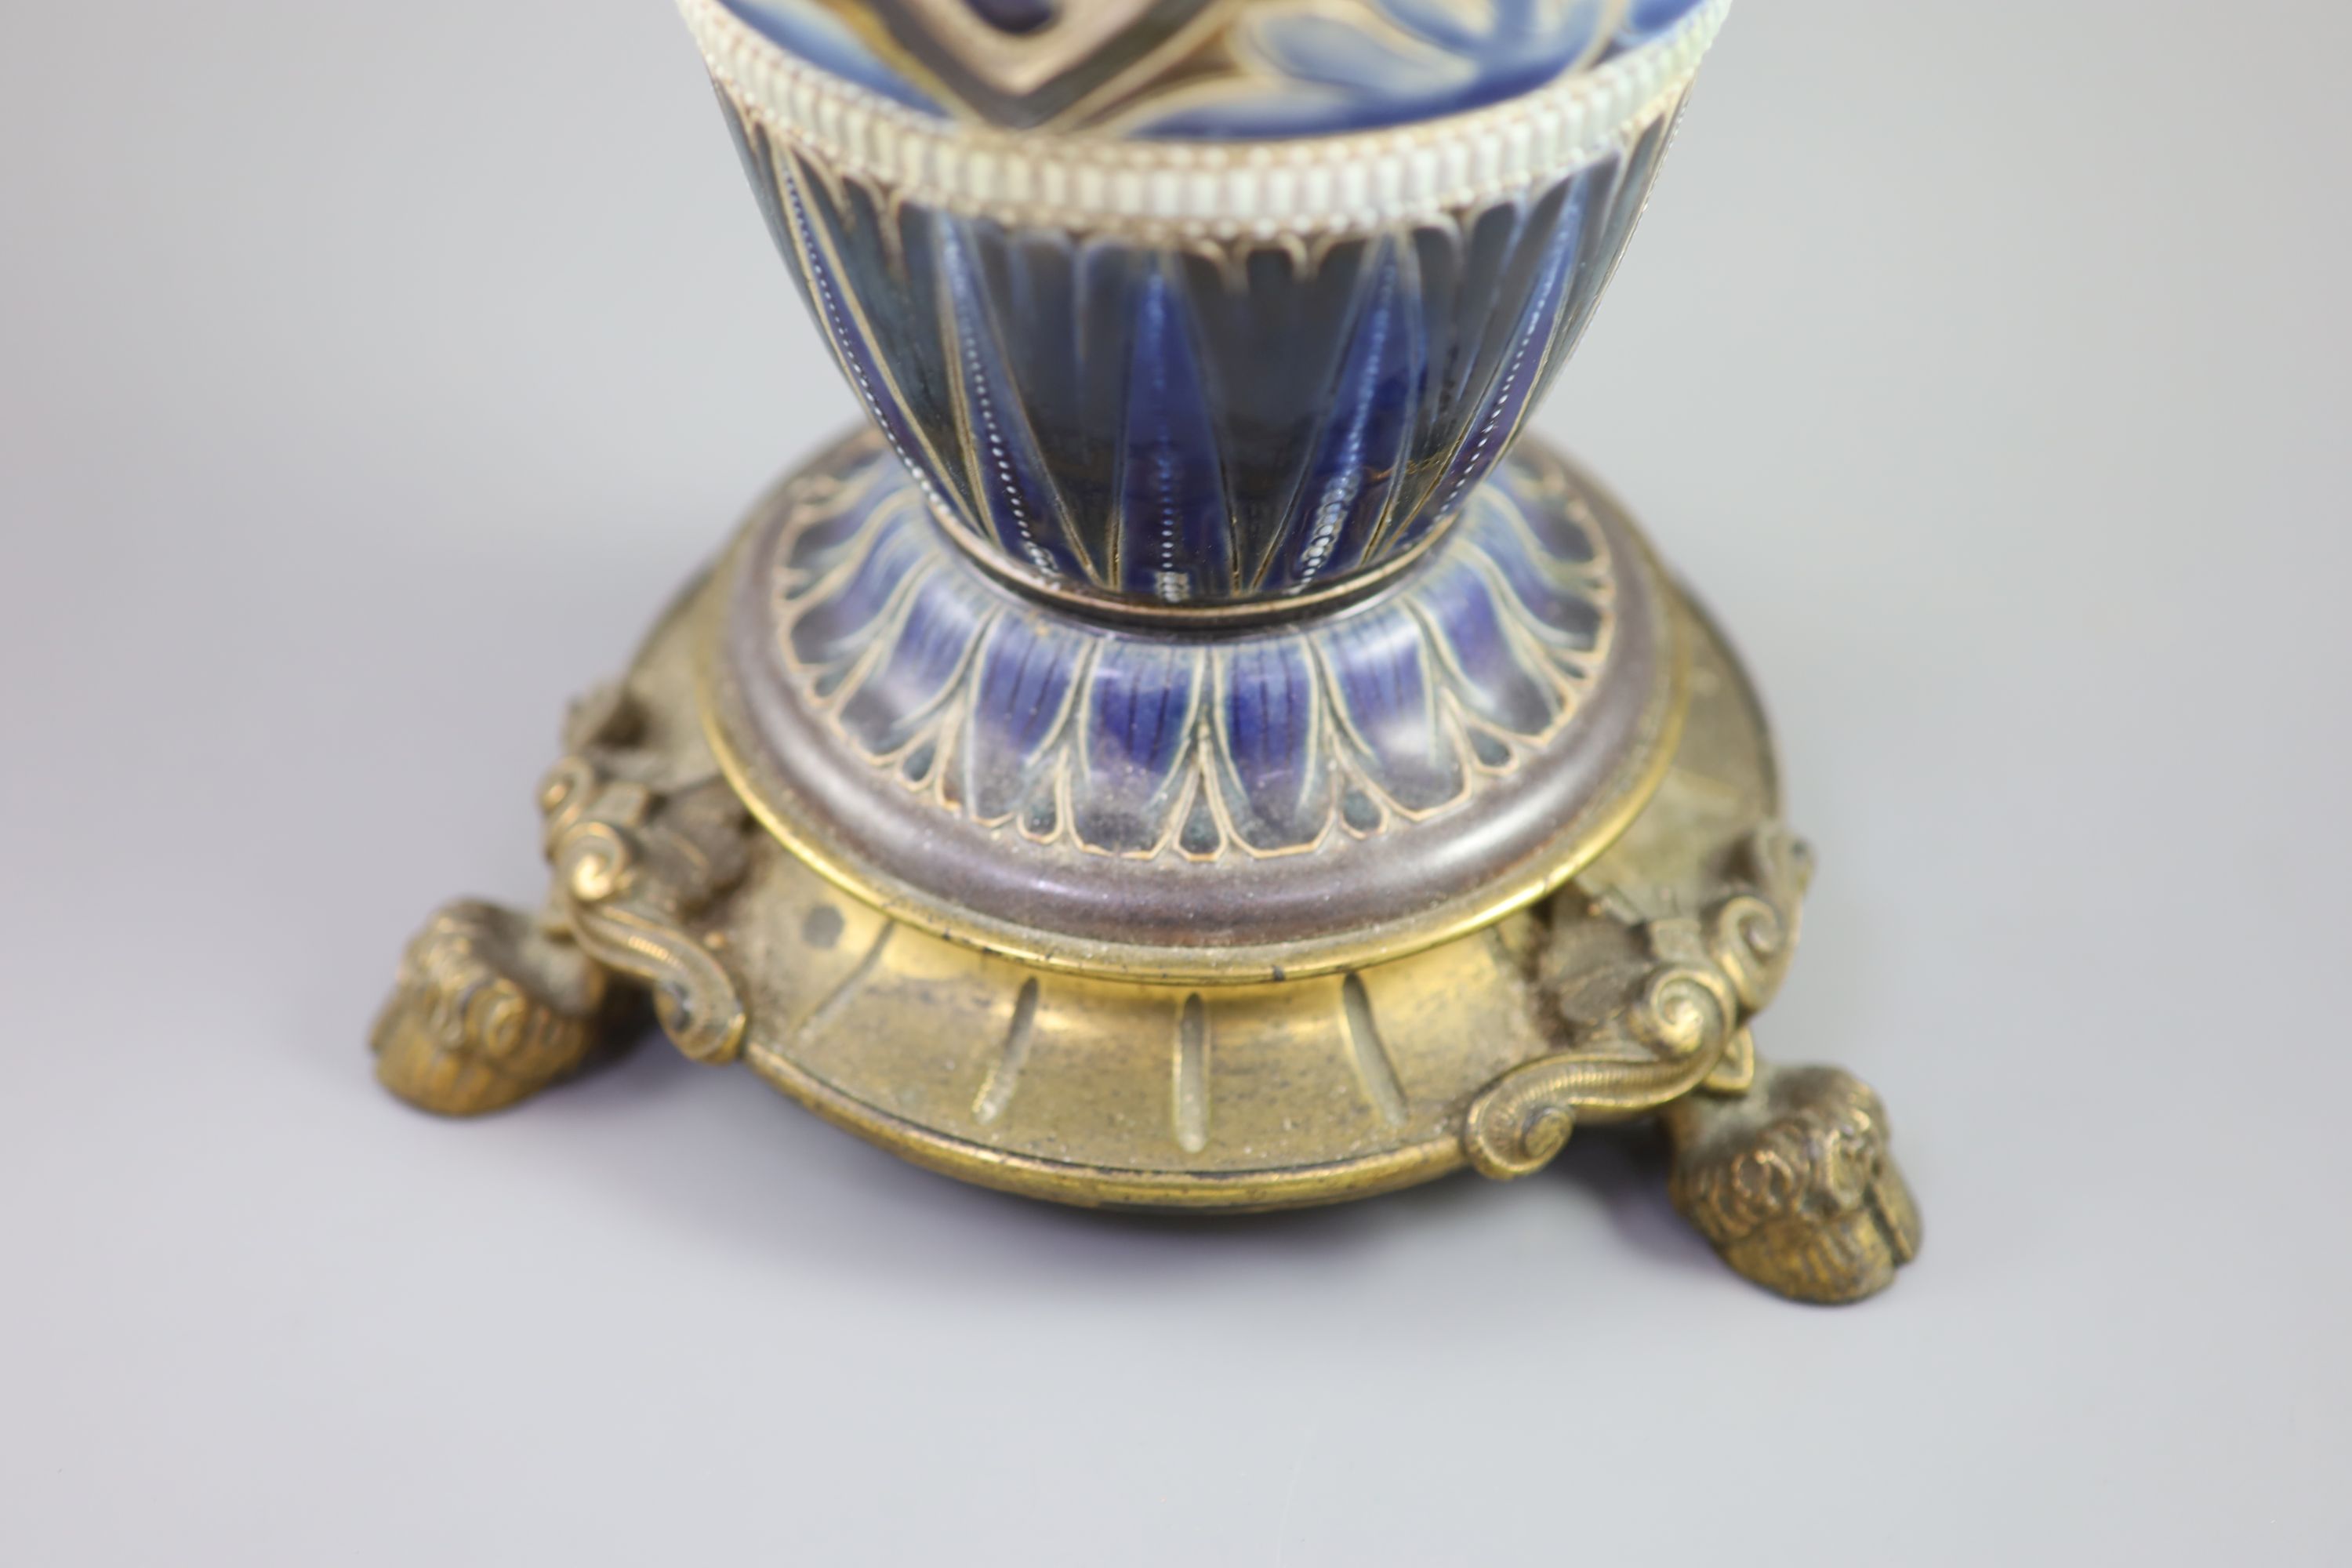 A large Doulton Lambeth stoneware oil lamp, by Edith D. Lupton, dated 1880, 50.5cm high excluding glass chimney and shade